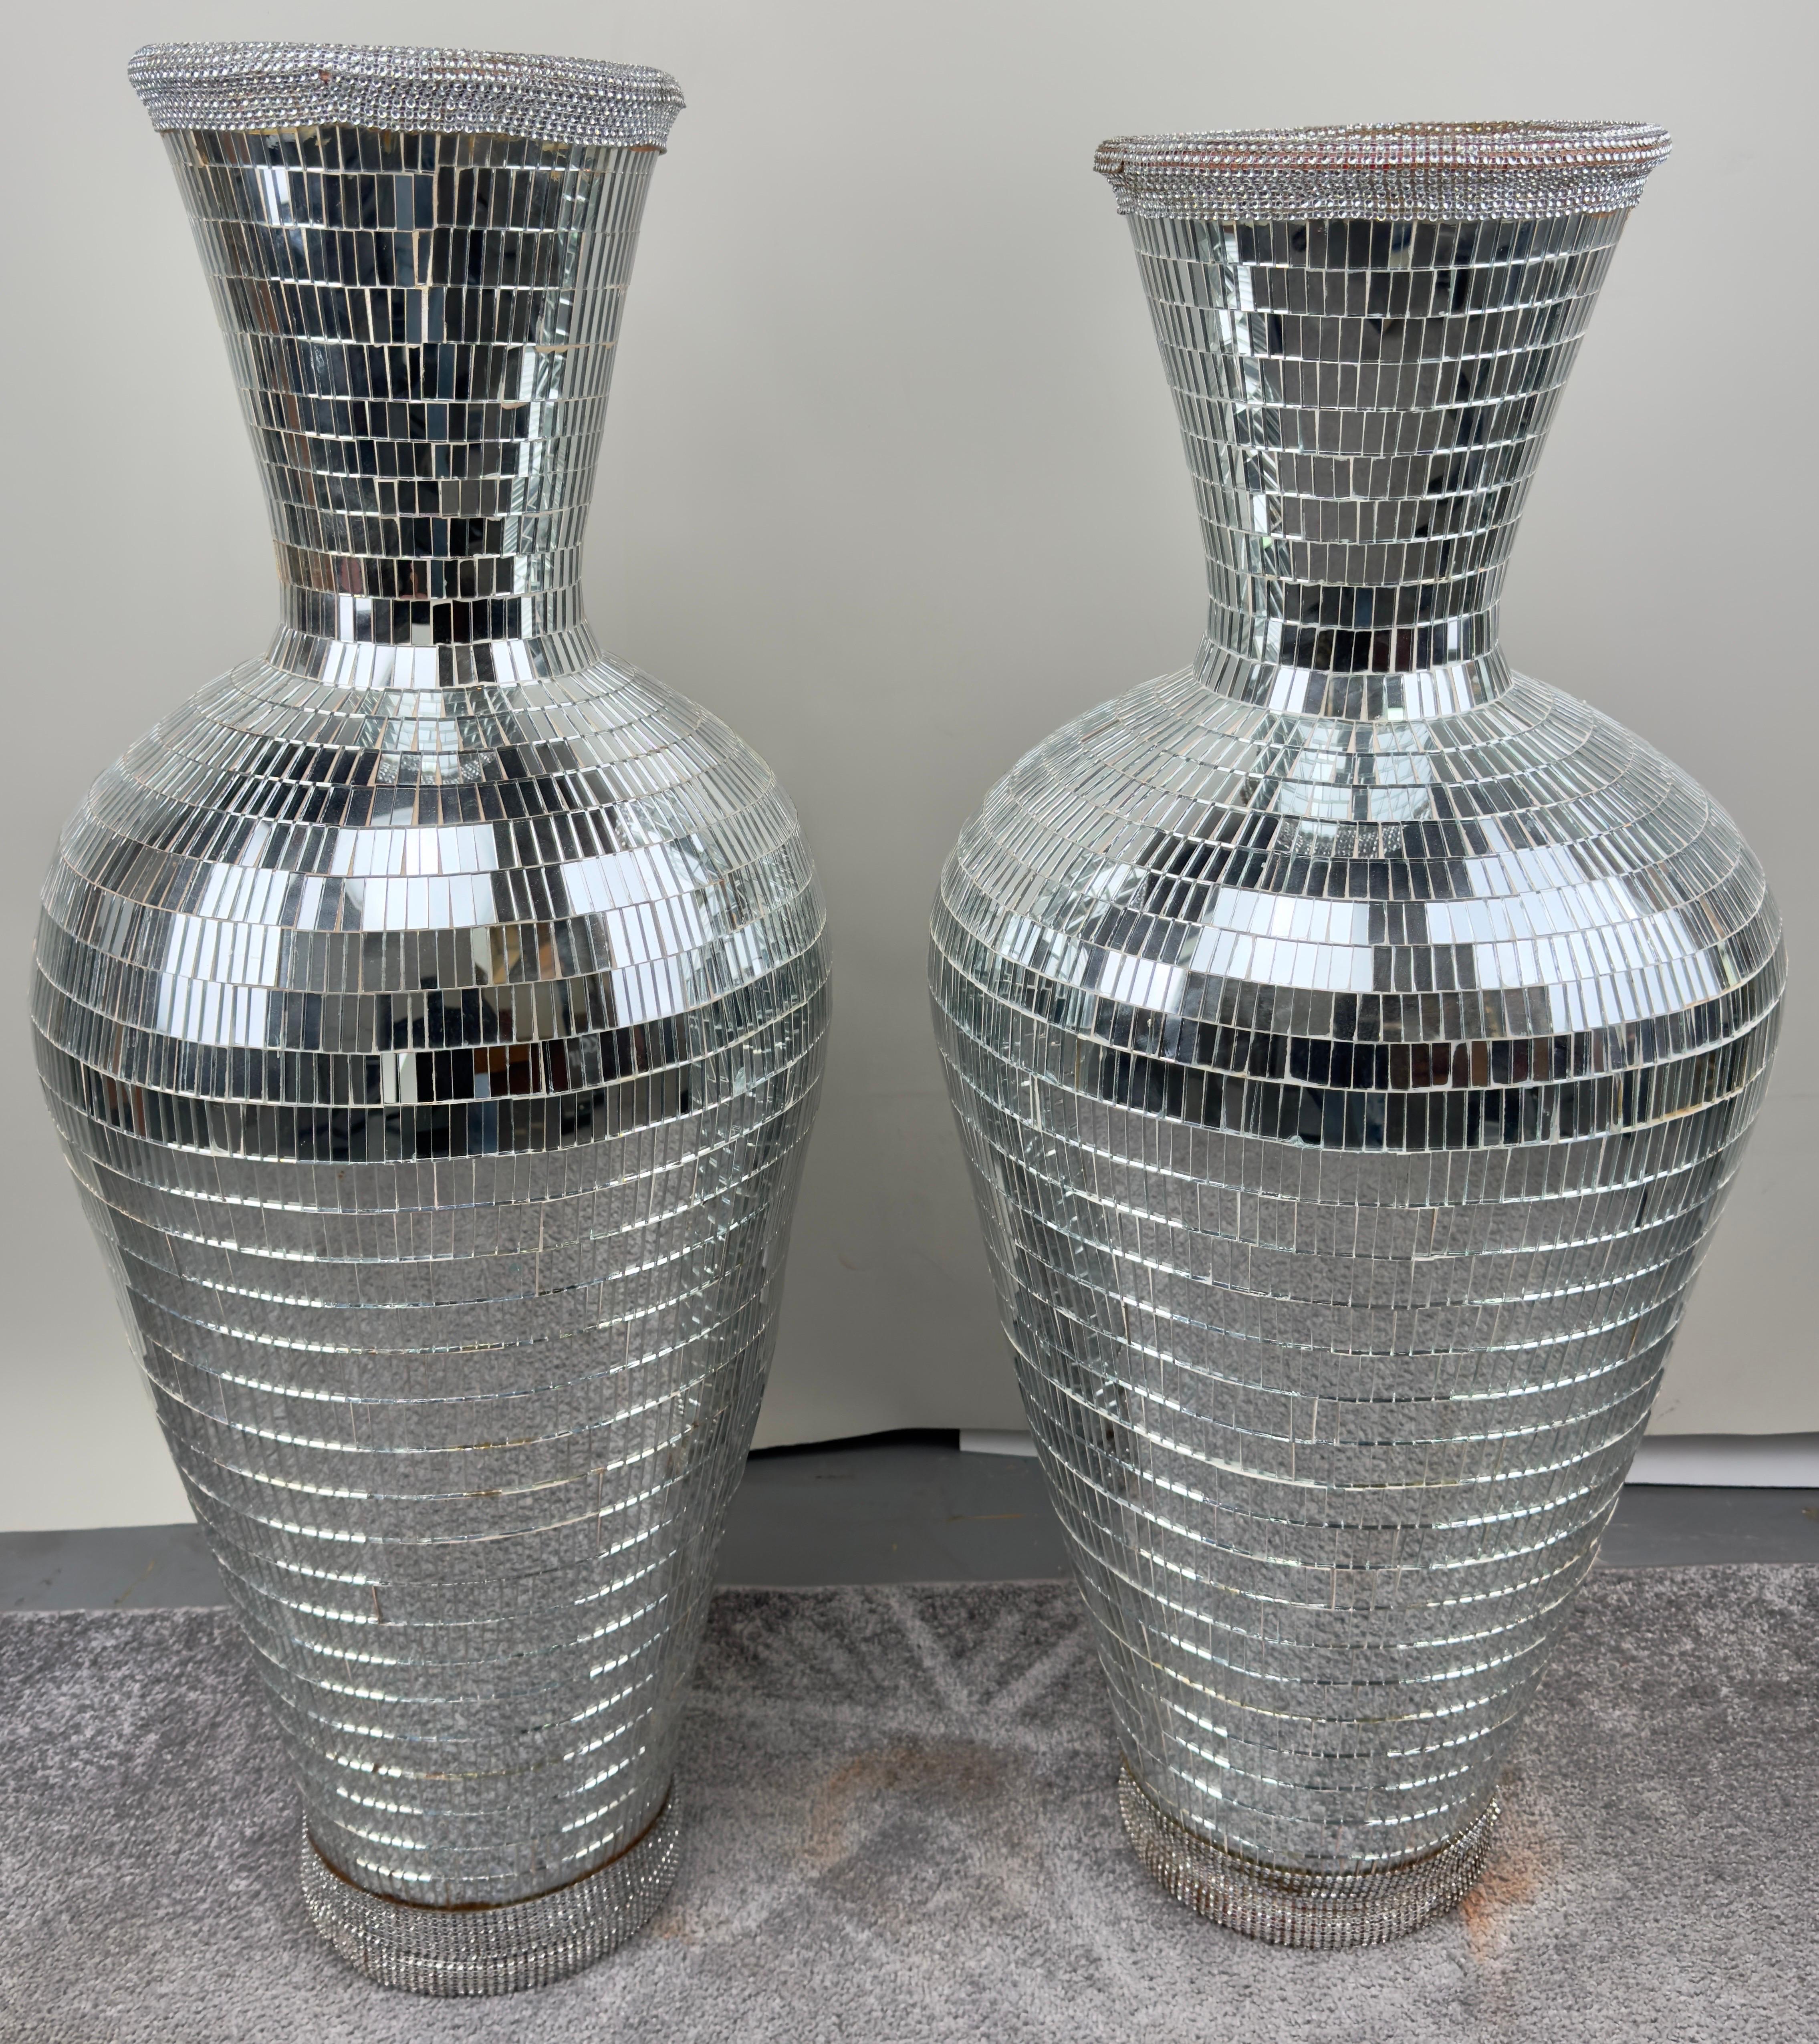 Experience grandeur with this luxurious pair of handmade Monumental Art Deco Style Micro Mosaic Mirrored Over Clay Urns. Each urn boasts intricate detailing, featuring hundreds of mirrored pieces set on a clay base. This exclusive pair exemplifies